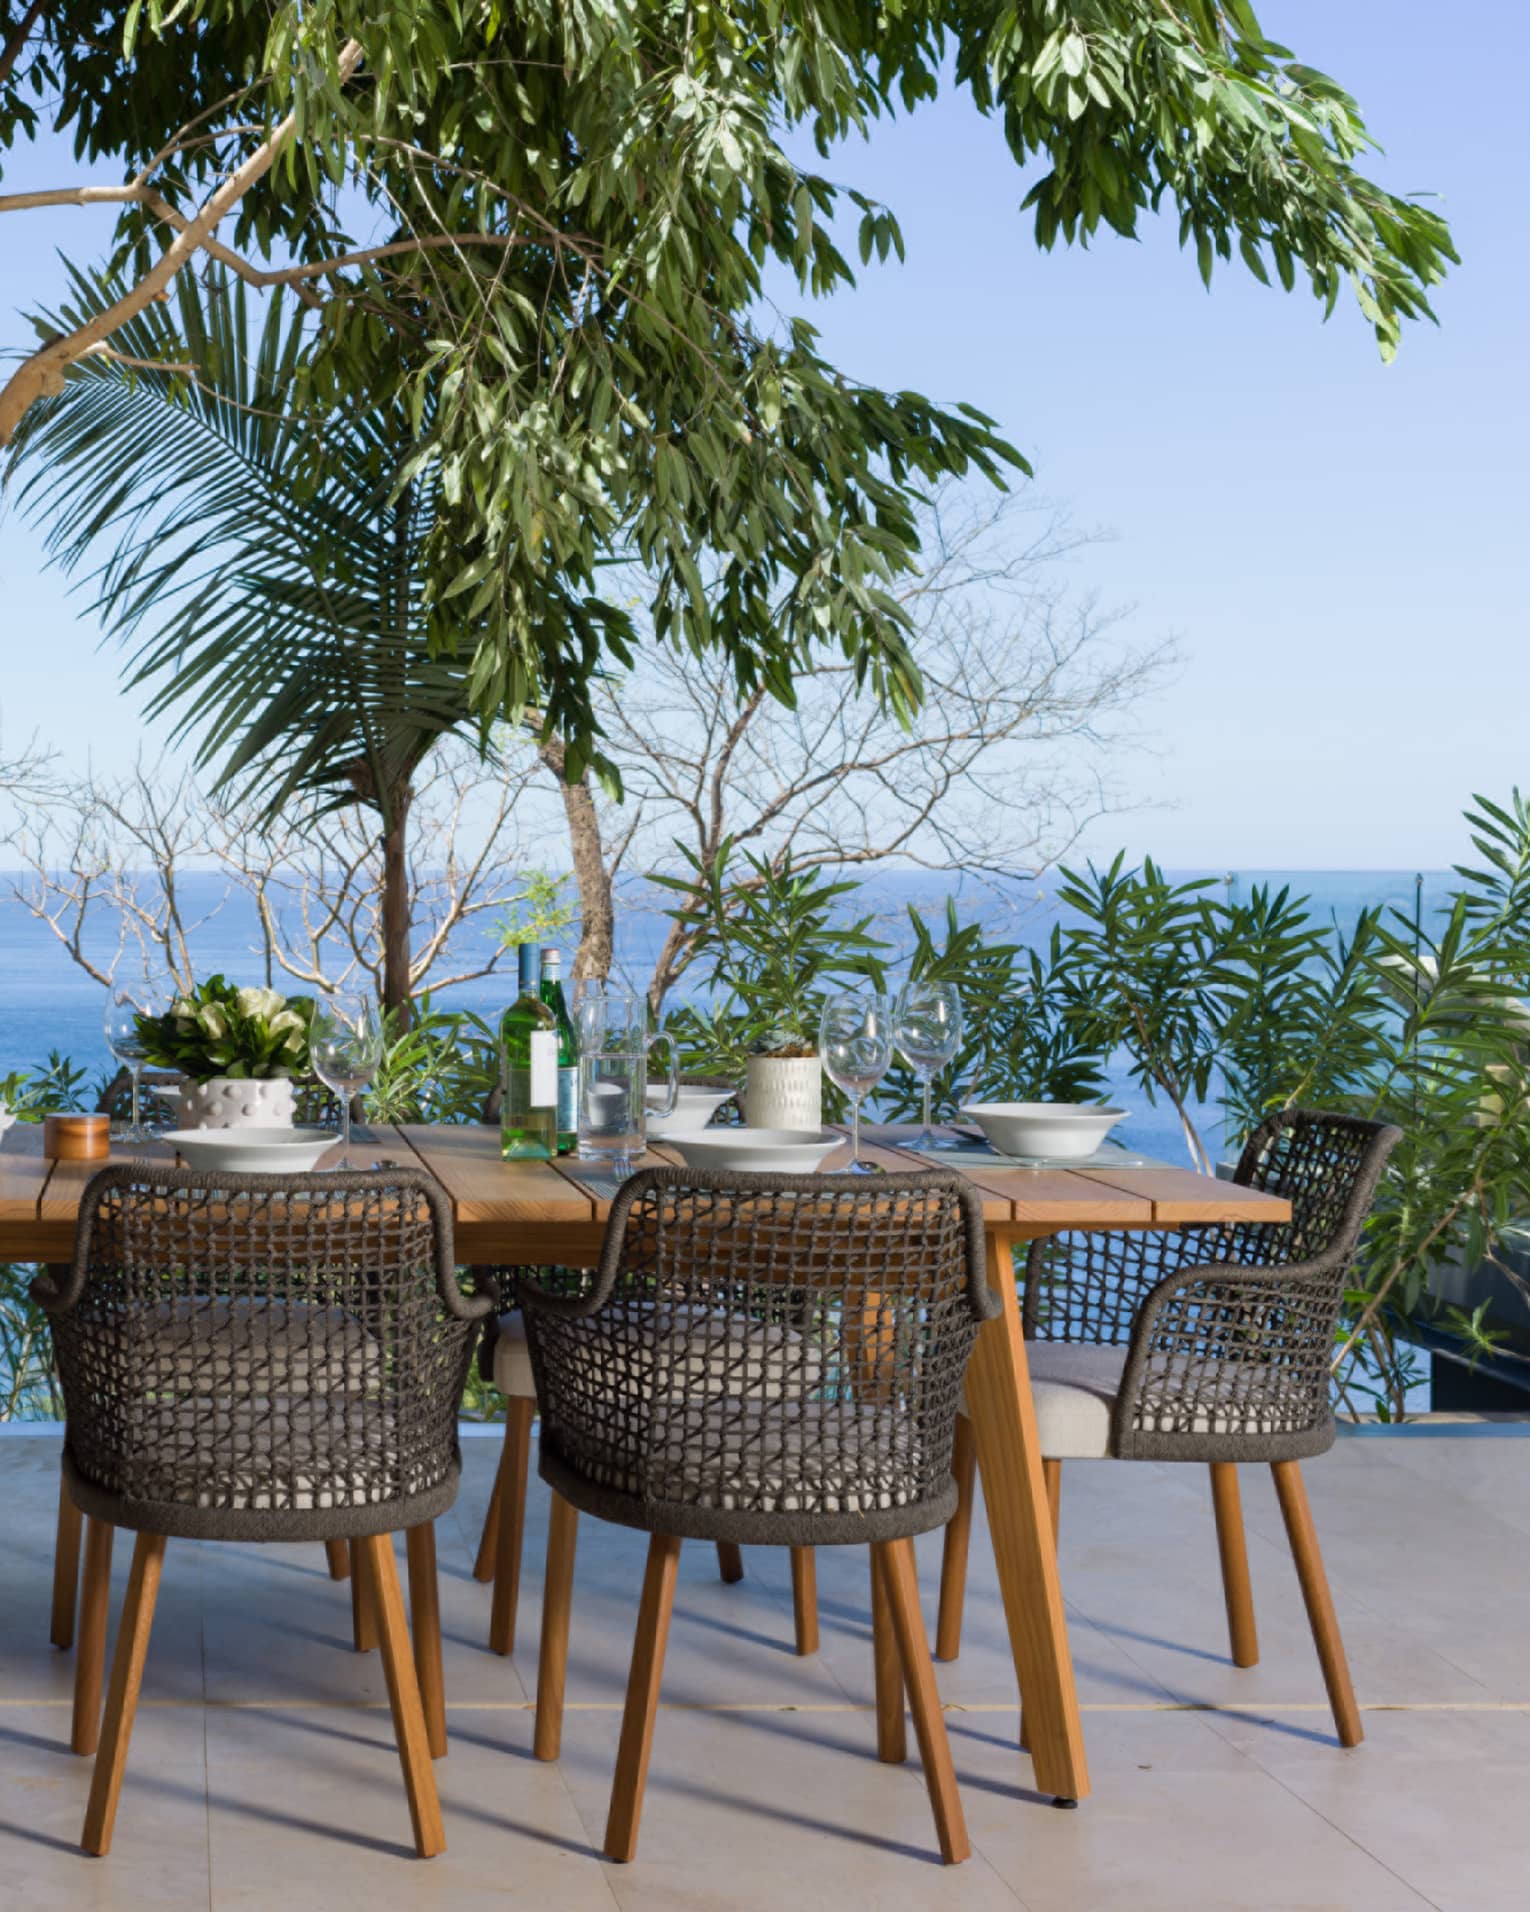 Outdoor shaded dining table set for eight amid lush tropical foliage on a terrace overlooking treetops, vast ocean beyond.